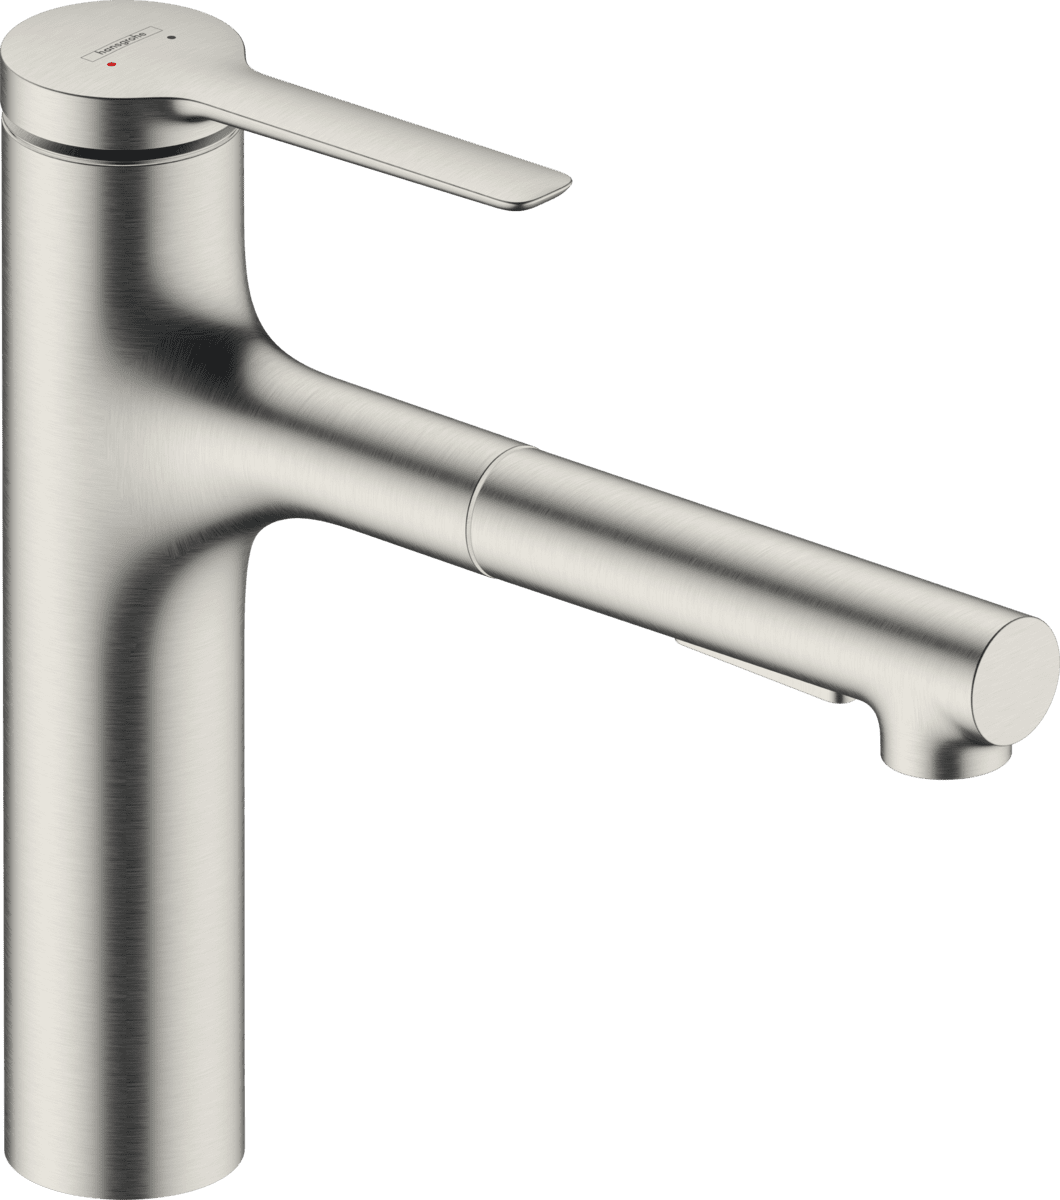 Picture of HANSGROHE Zesis M33 Single lever kitchen mixer, 160, pull-out spray, 2jet, sBox lite #74804800 - Stainless Steel Finish